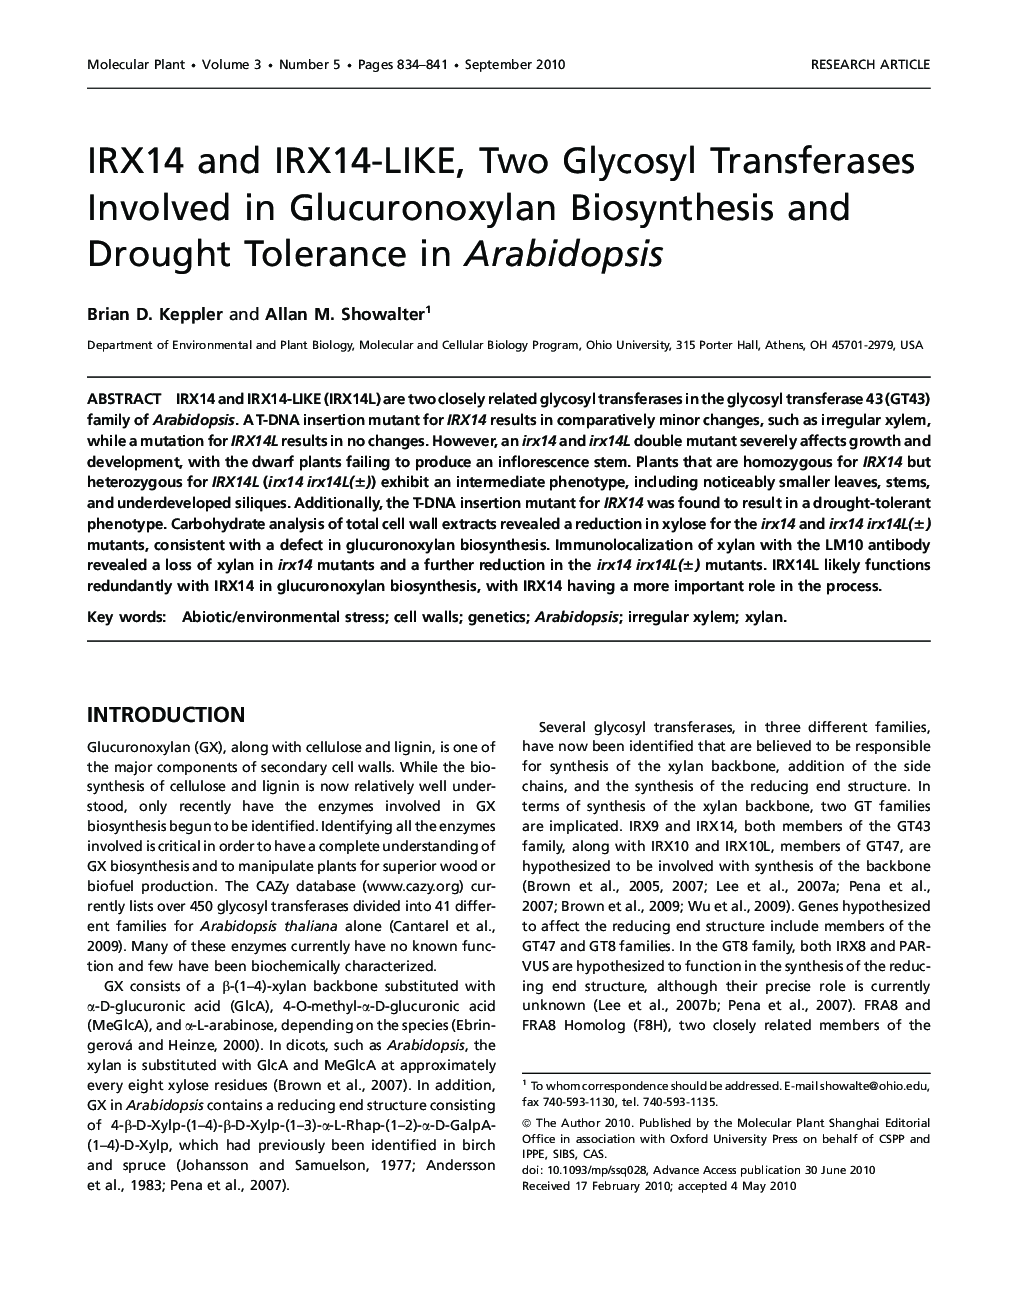 IRX14 and IRX14-LIKE, Two Glycosyl Transferases Involved in Glucuronoxylan Biosynthesis and Drought Tolerance in Arabidopsis 